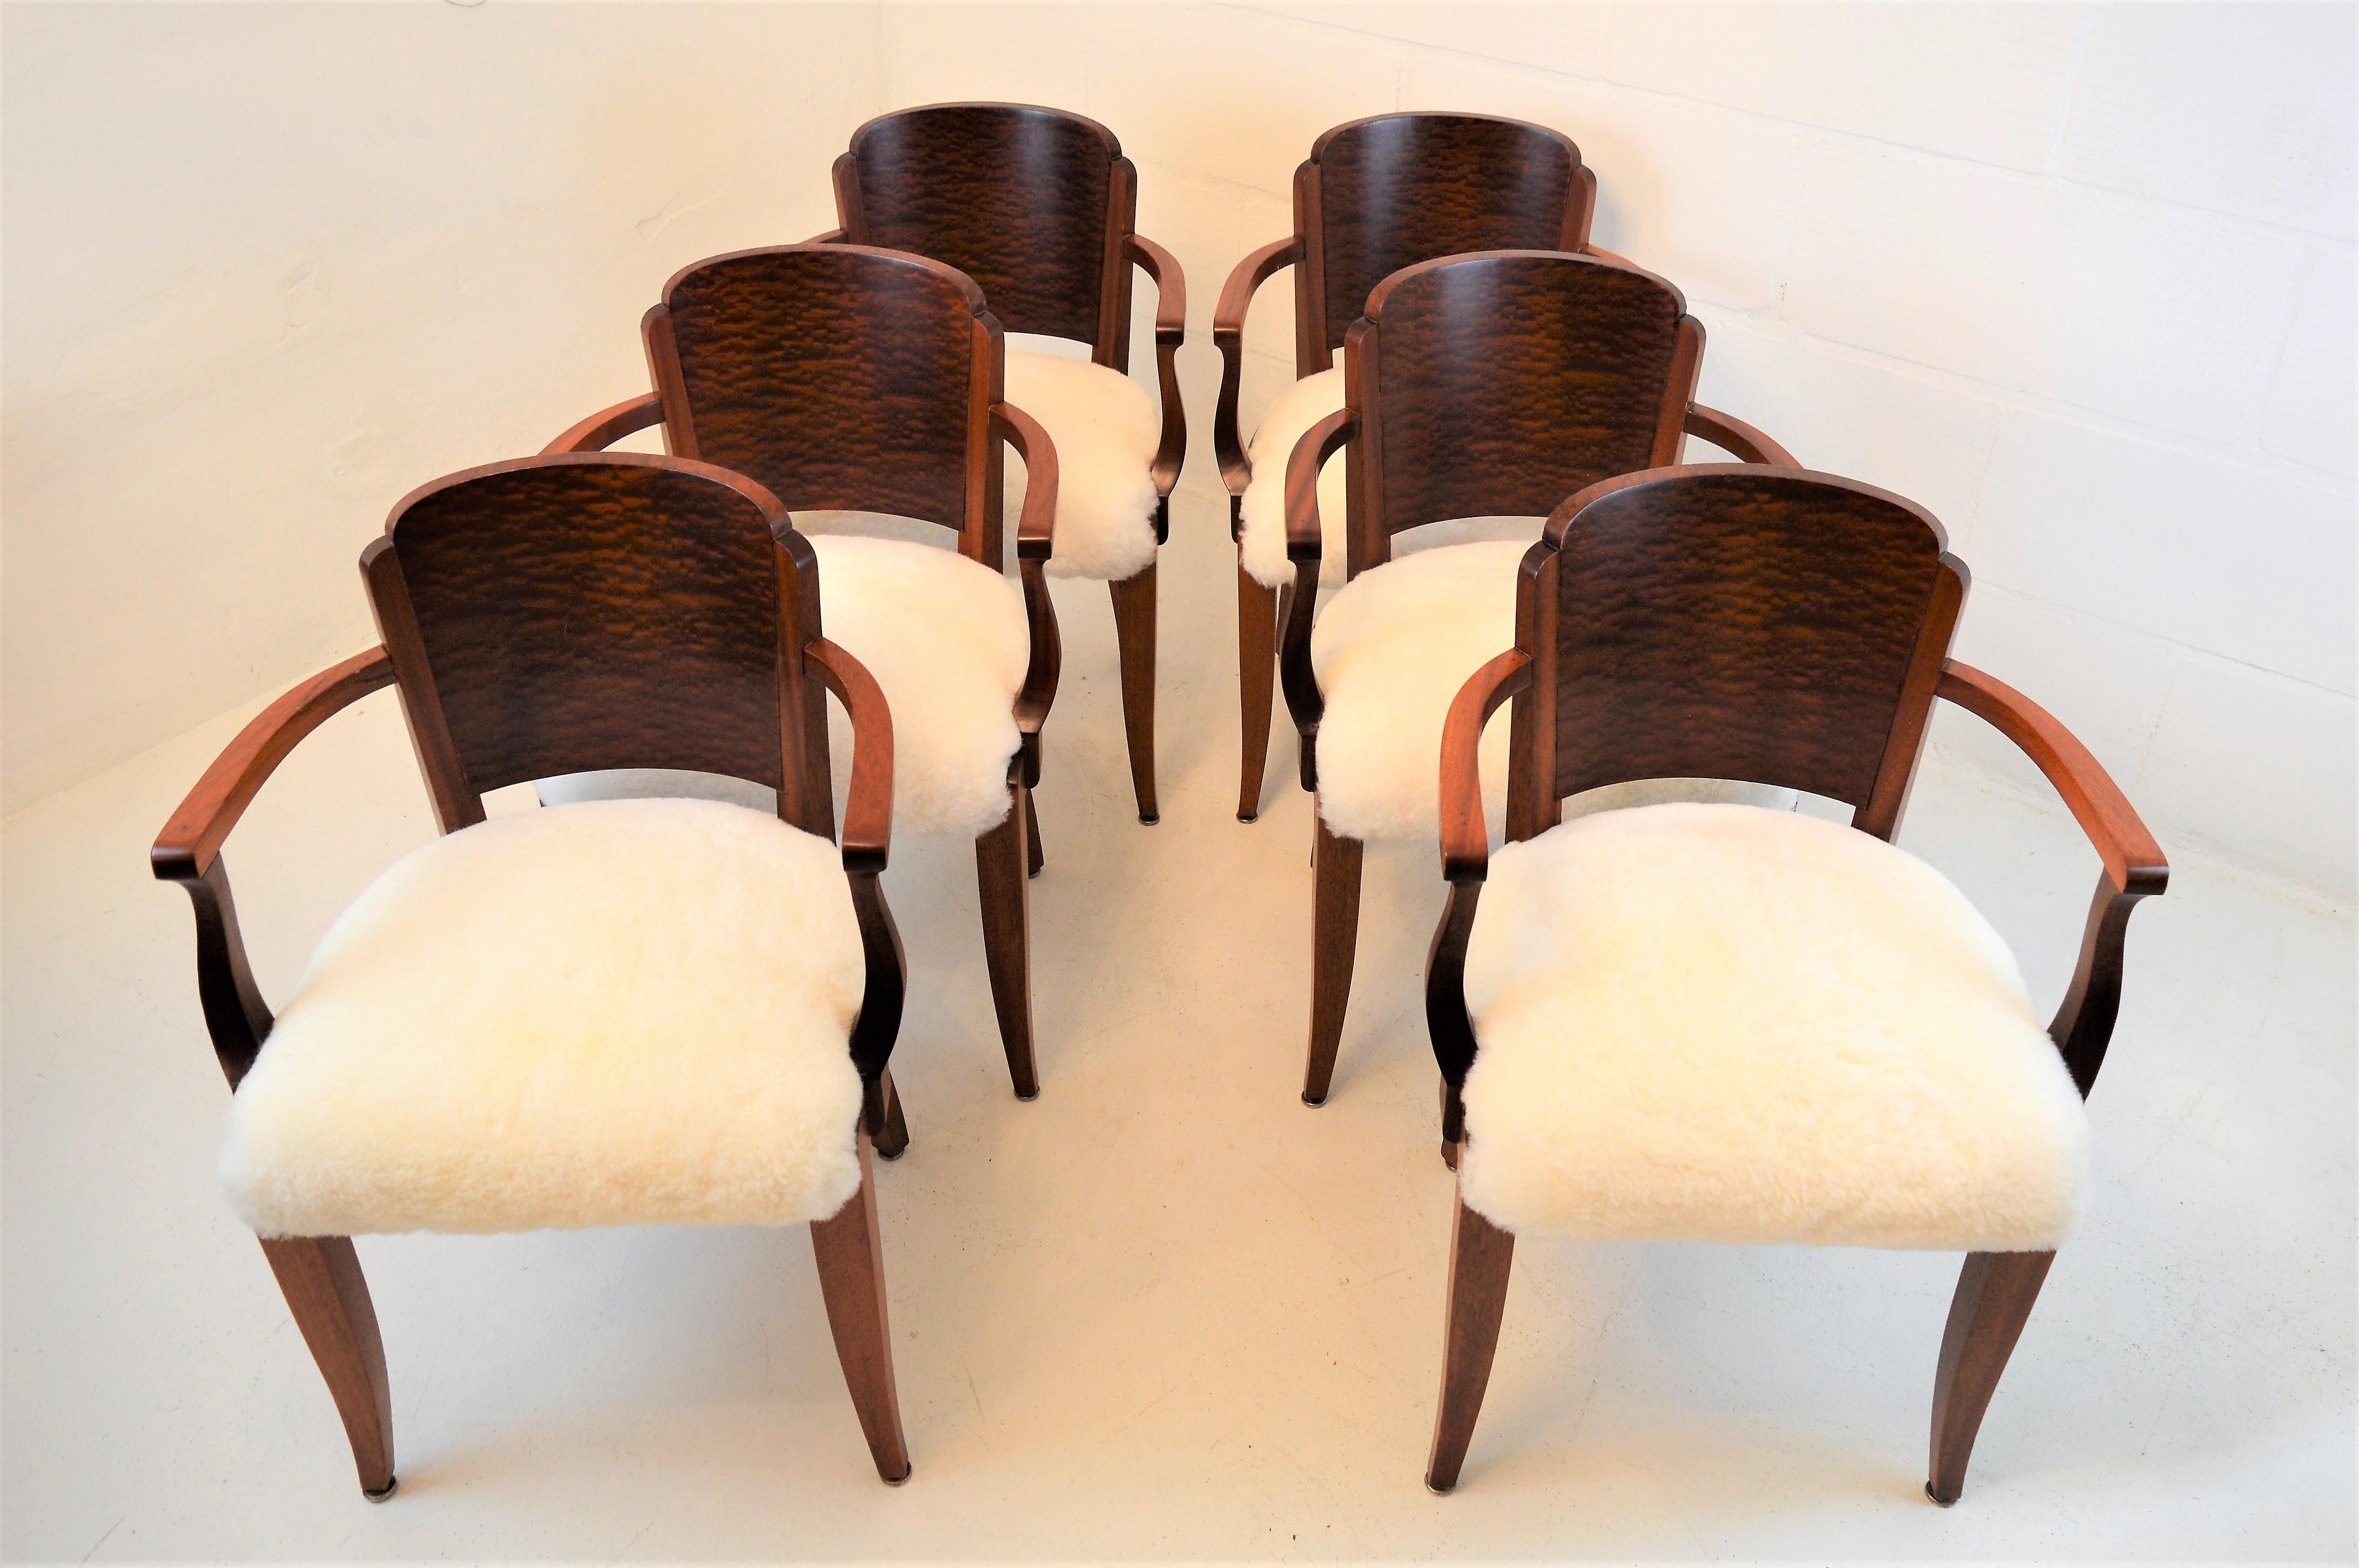 Mid-20th Century Gaston Poisson Art Deco Armchairs Covered with Sheepskin in Solid Mahogany